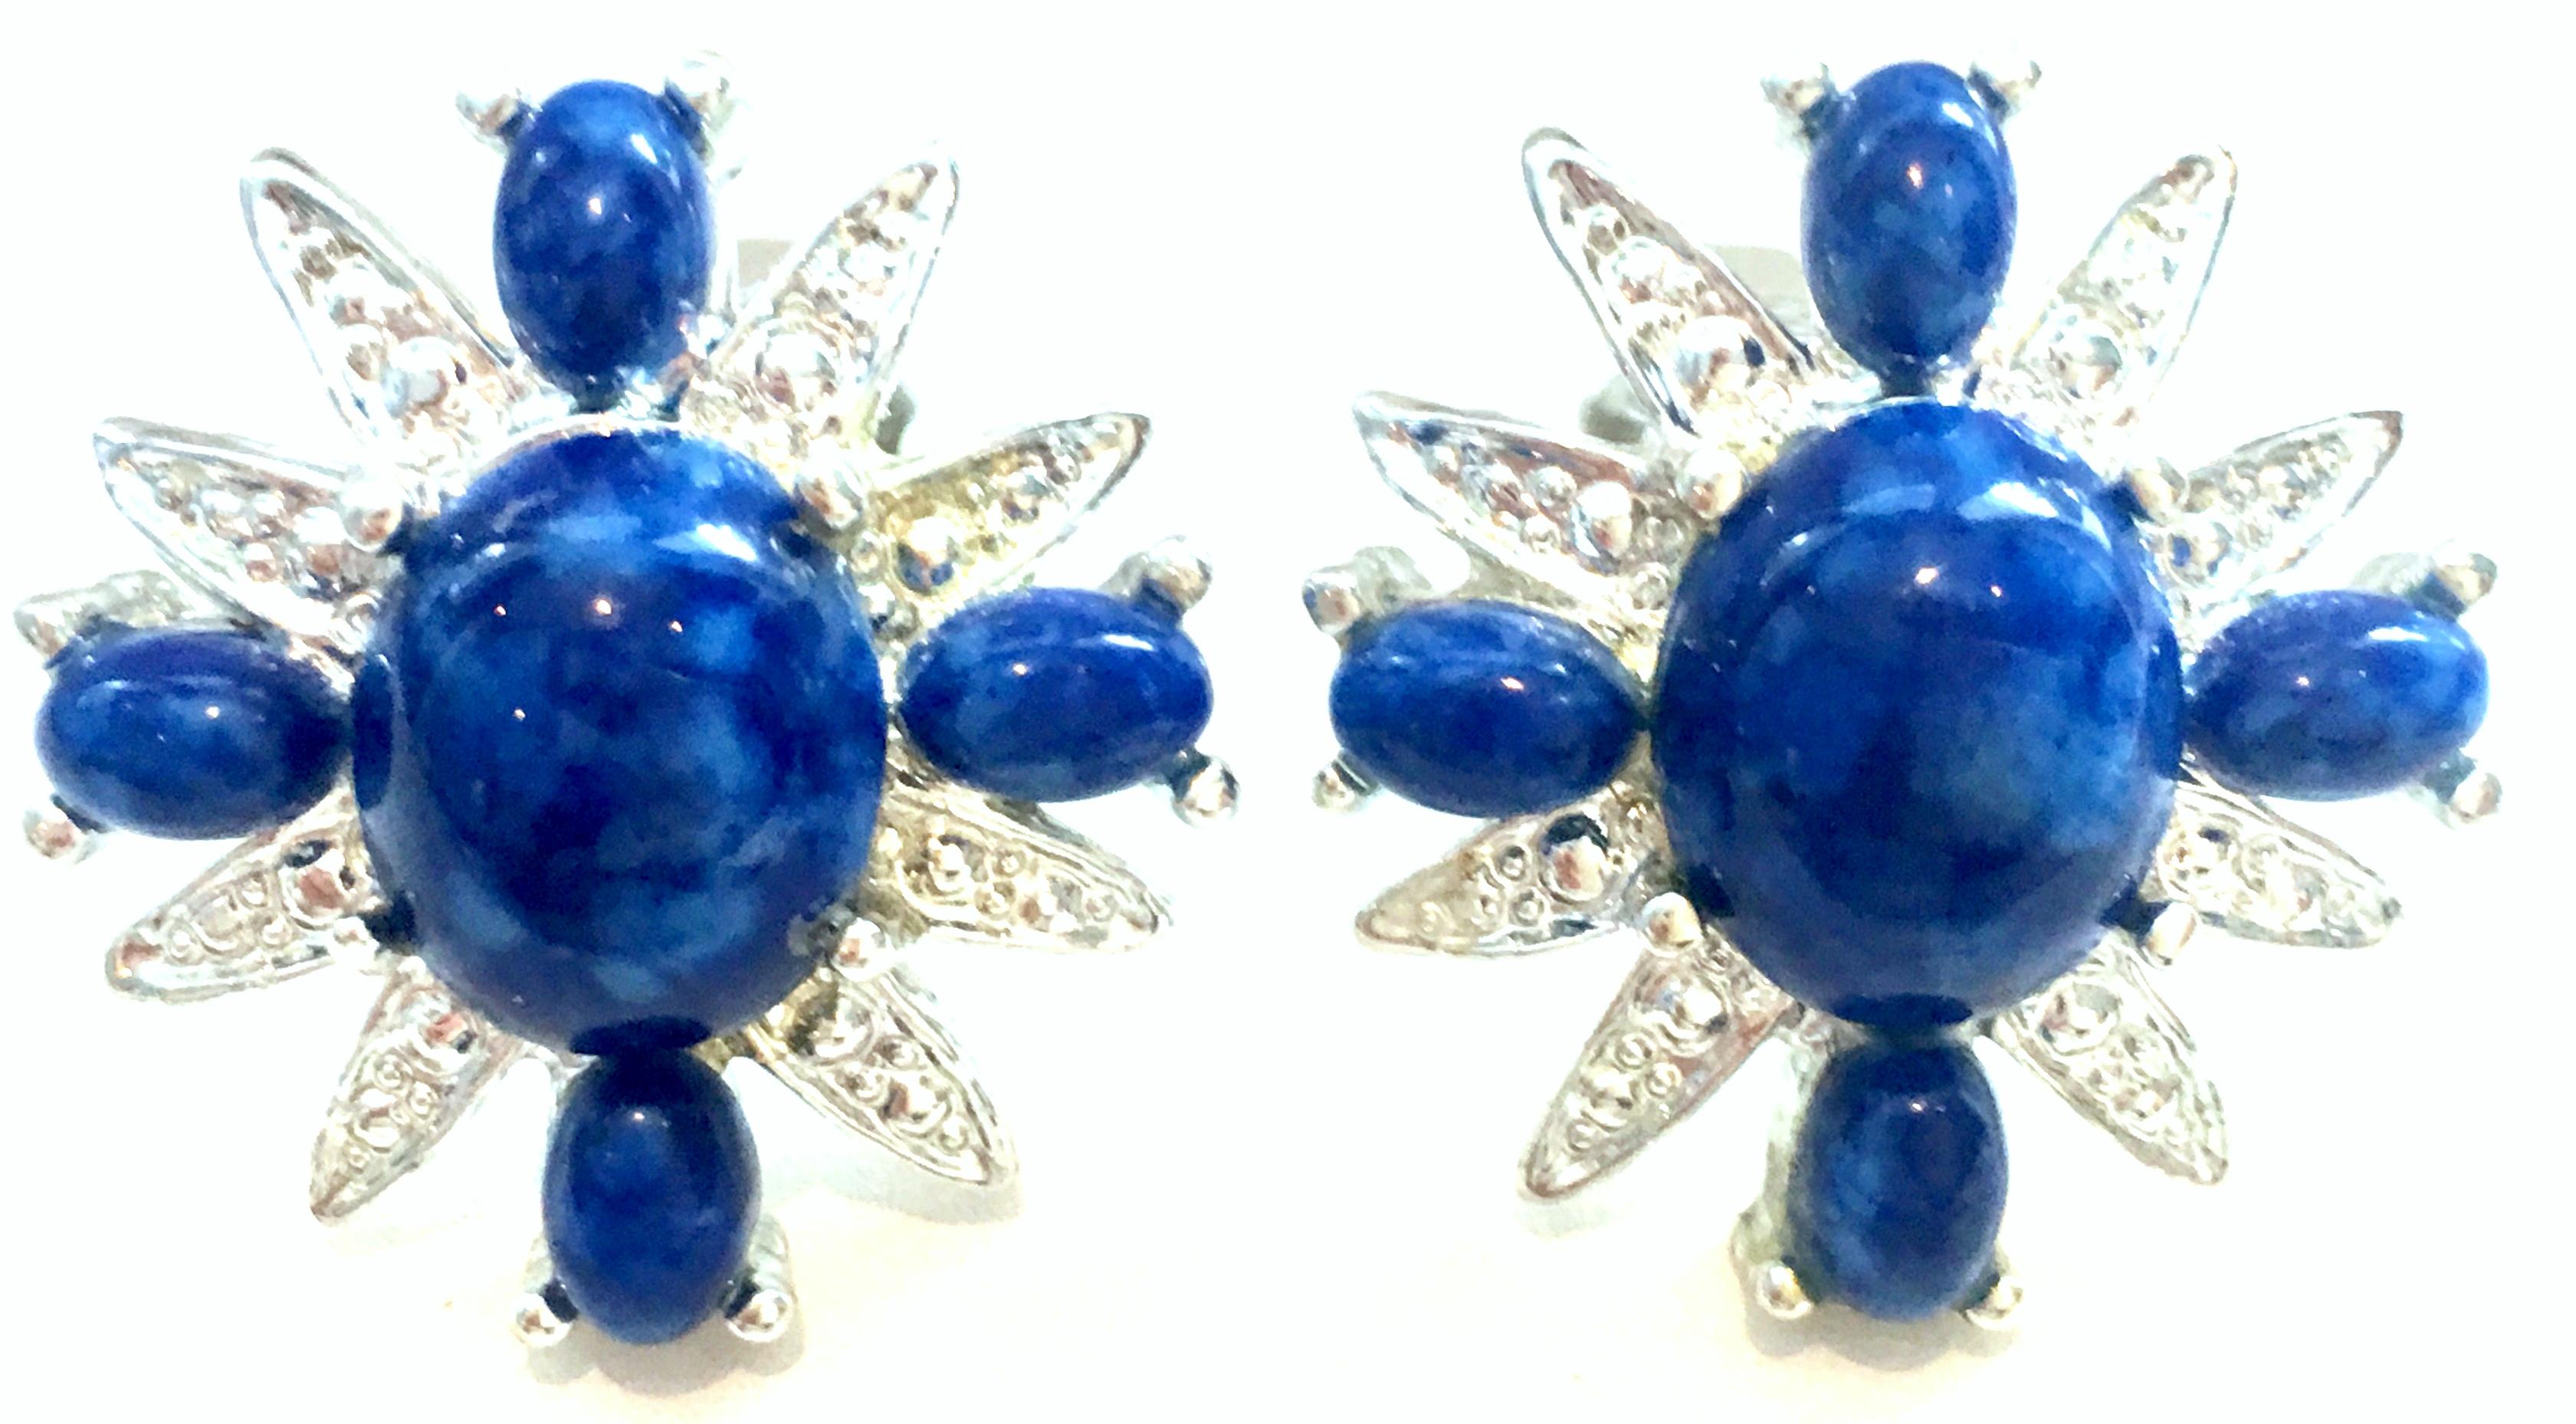 20th Century Pair Of Silver Plate & Faux Lapis Lazuli Earrings By, Sarah Coventry. These silver plate and faux Lapis Lazuli clip style dimensional earrings feature an abstract Maltese cross design. Each piece is signed on the underside, Sarah.